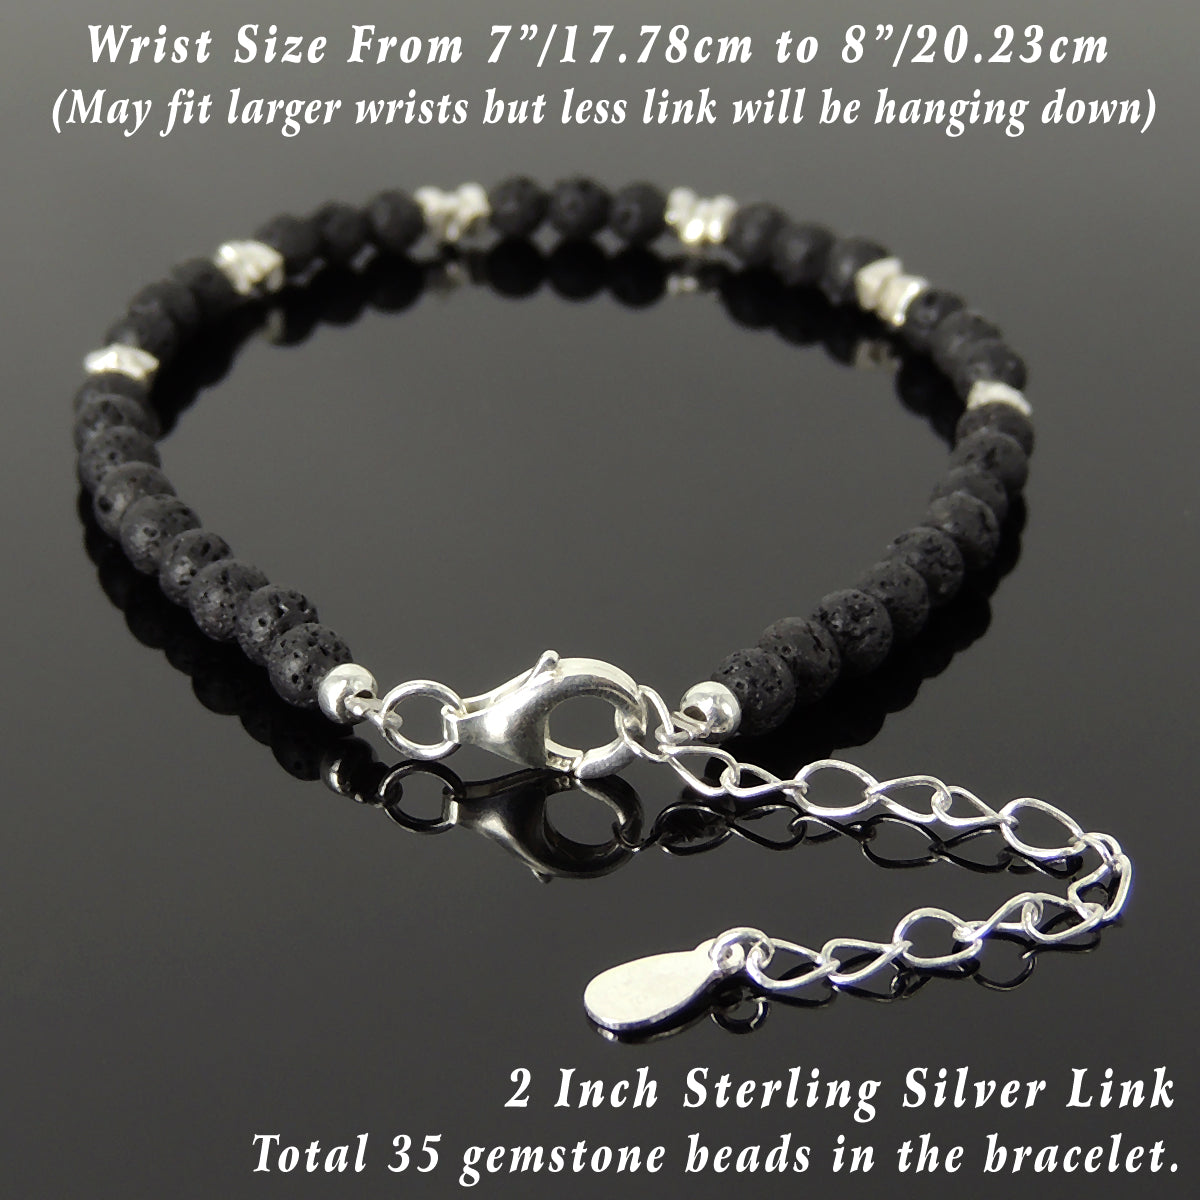 4mm Lava Rock Healing Stone Bracelet with S925 Sterling Silver Nugget Beads, Chain, & Clasp - Handmade by Gem & Silver BR1266